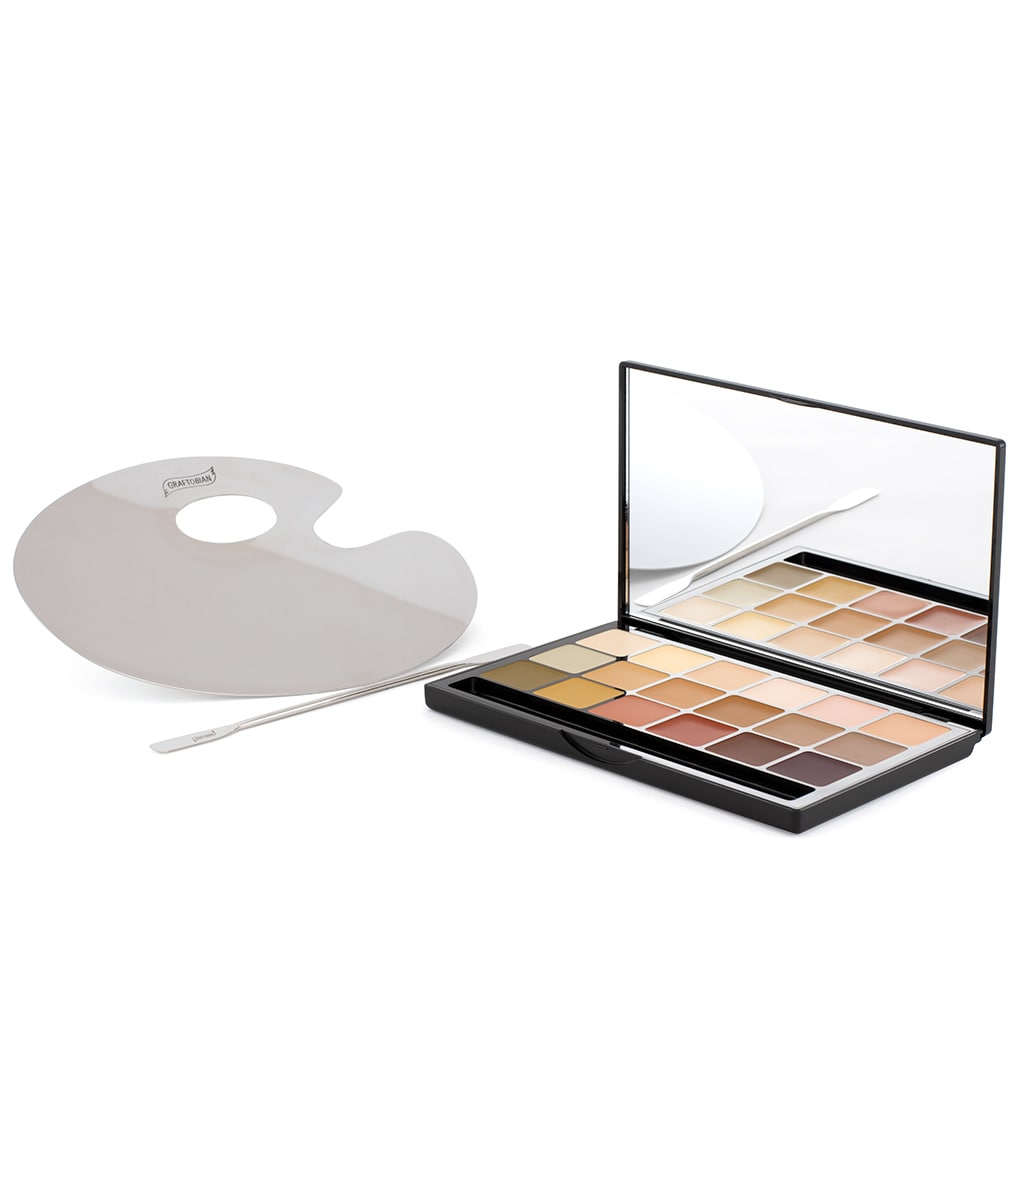 Glamour Crème™ Global Corrector + Mixing Palette and Spatula Set ($108